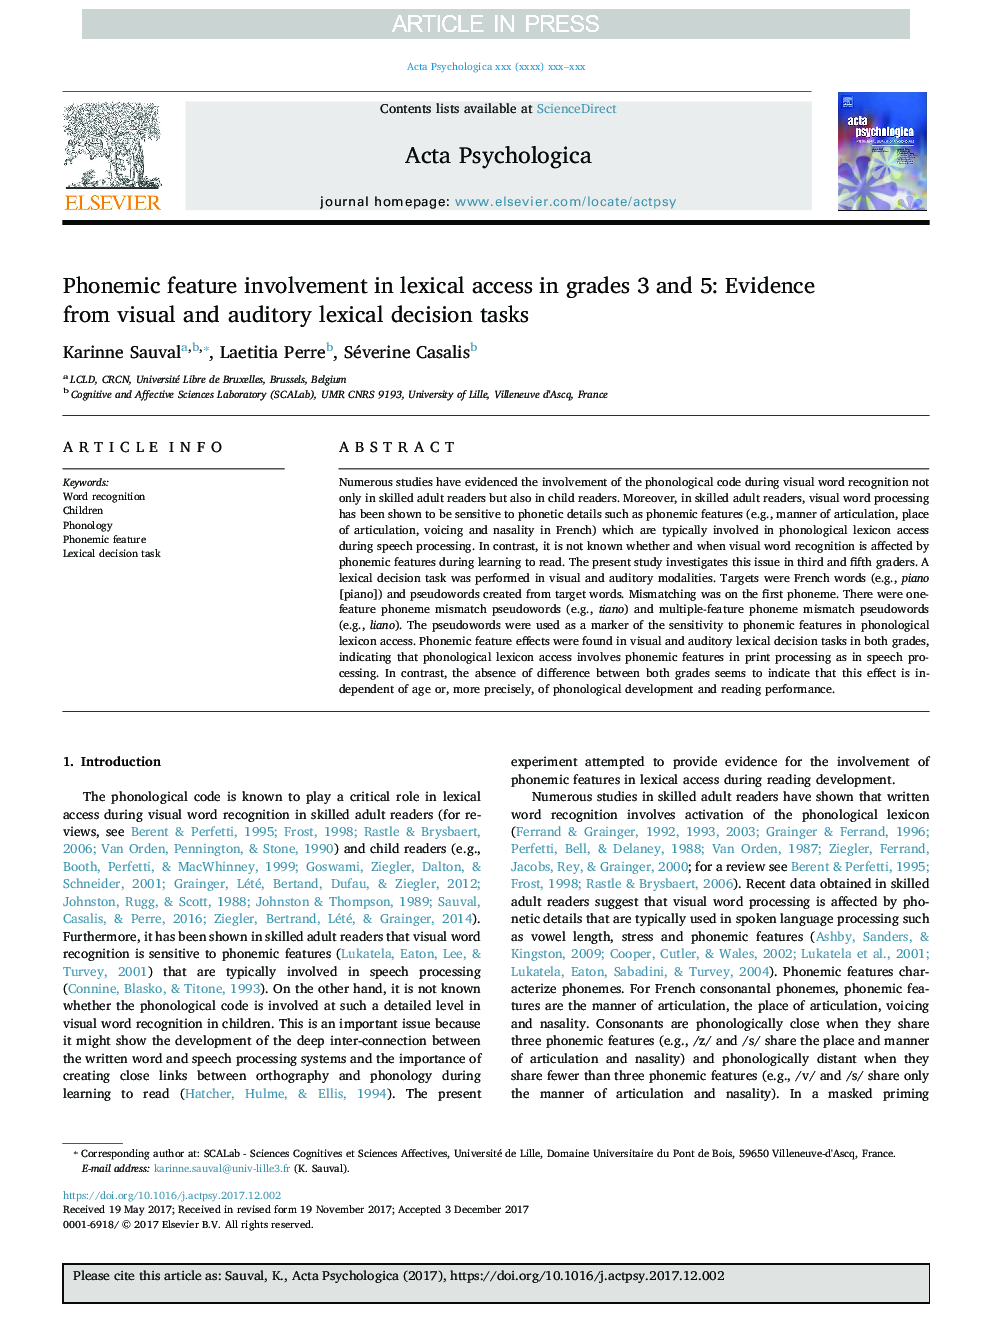 Phonemic feature involvement in lexical access in grades 3 and 5: Evidence from visual and auditory lexical decision tasks